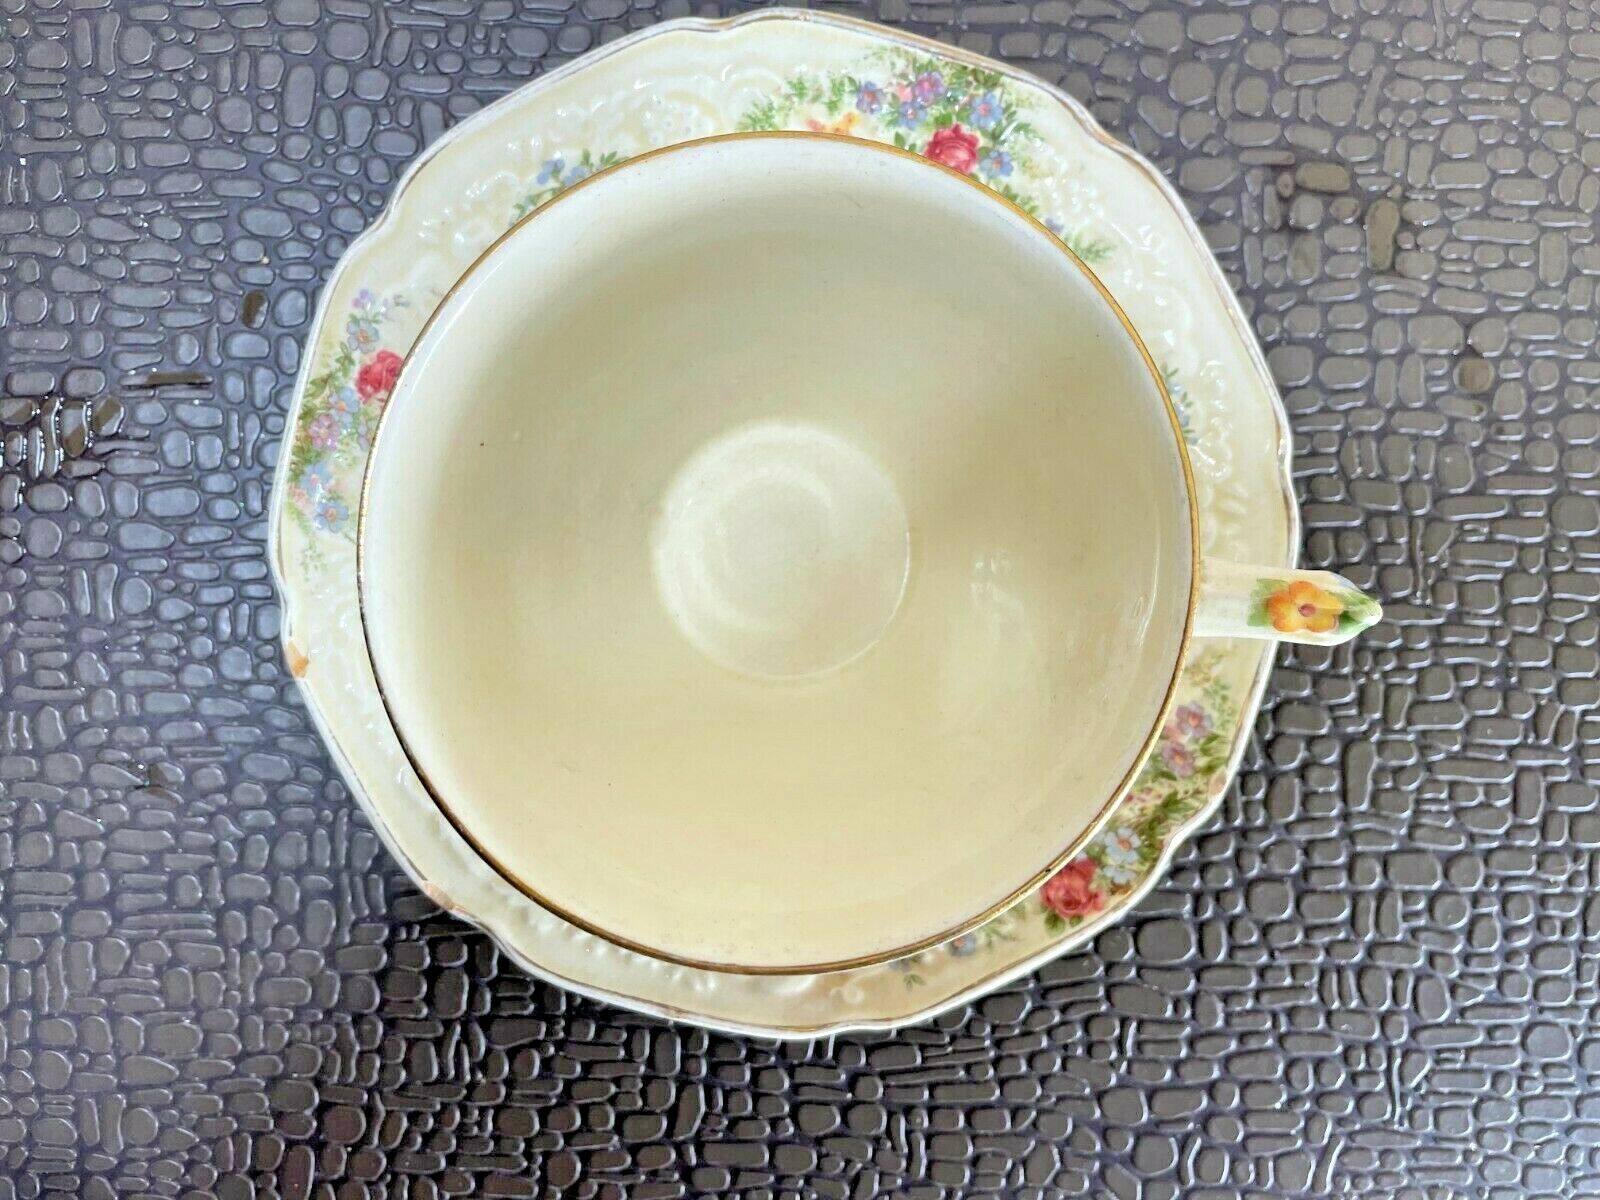 Vintage Crown Ducal Gainsborough England Teacup, Saucer, and Plate Dainty Retro